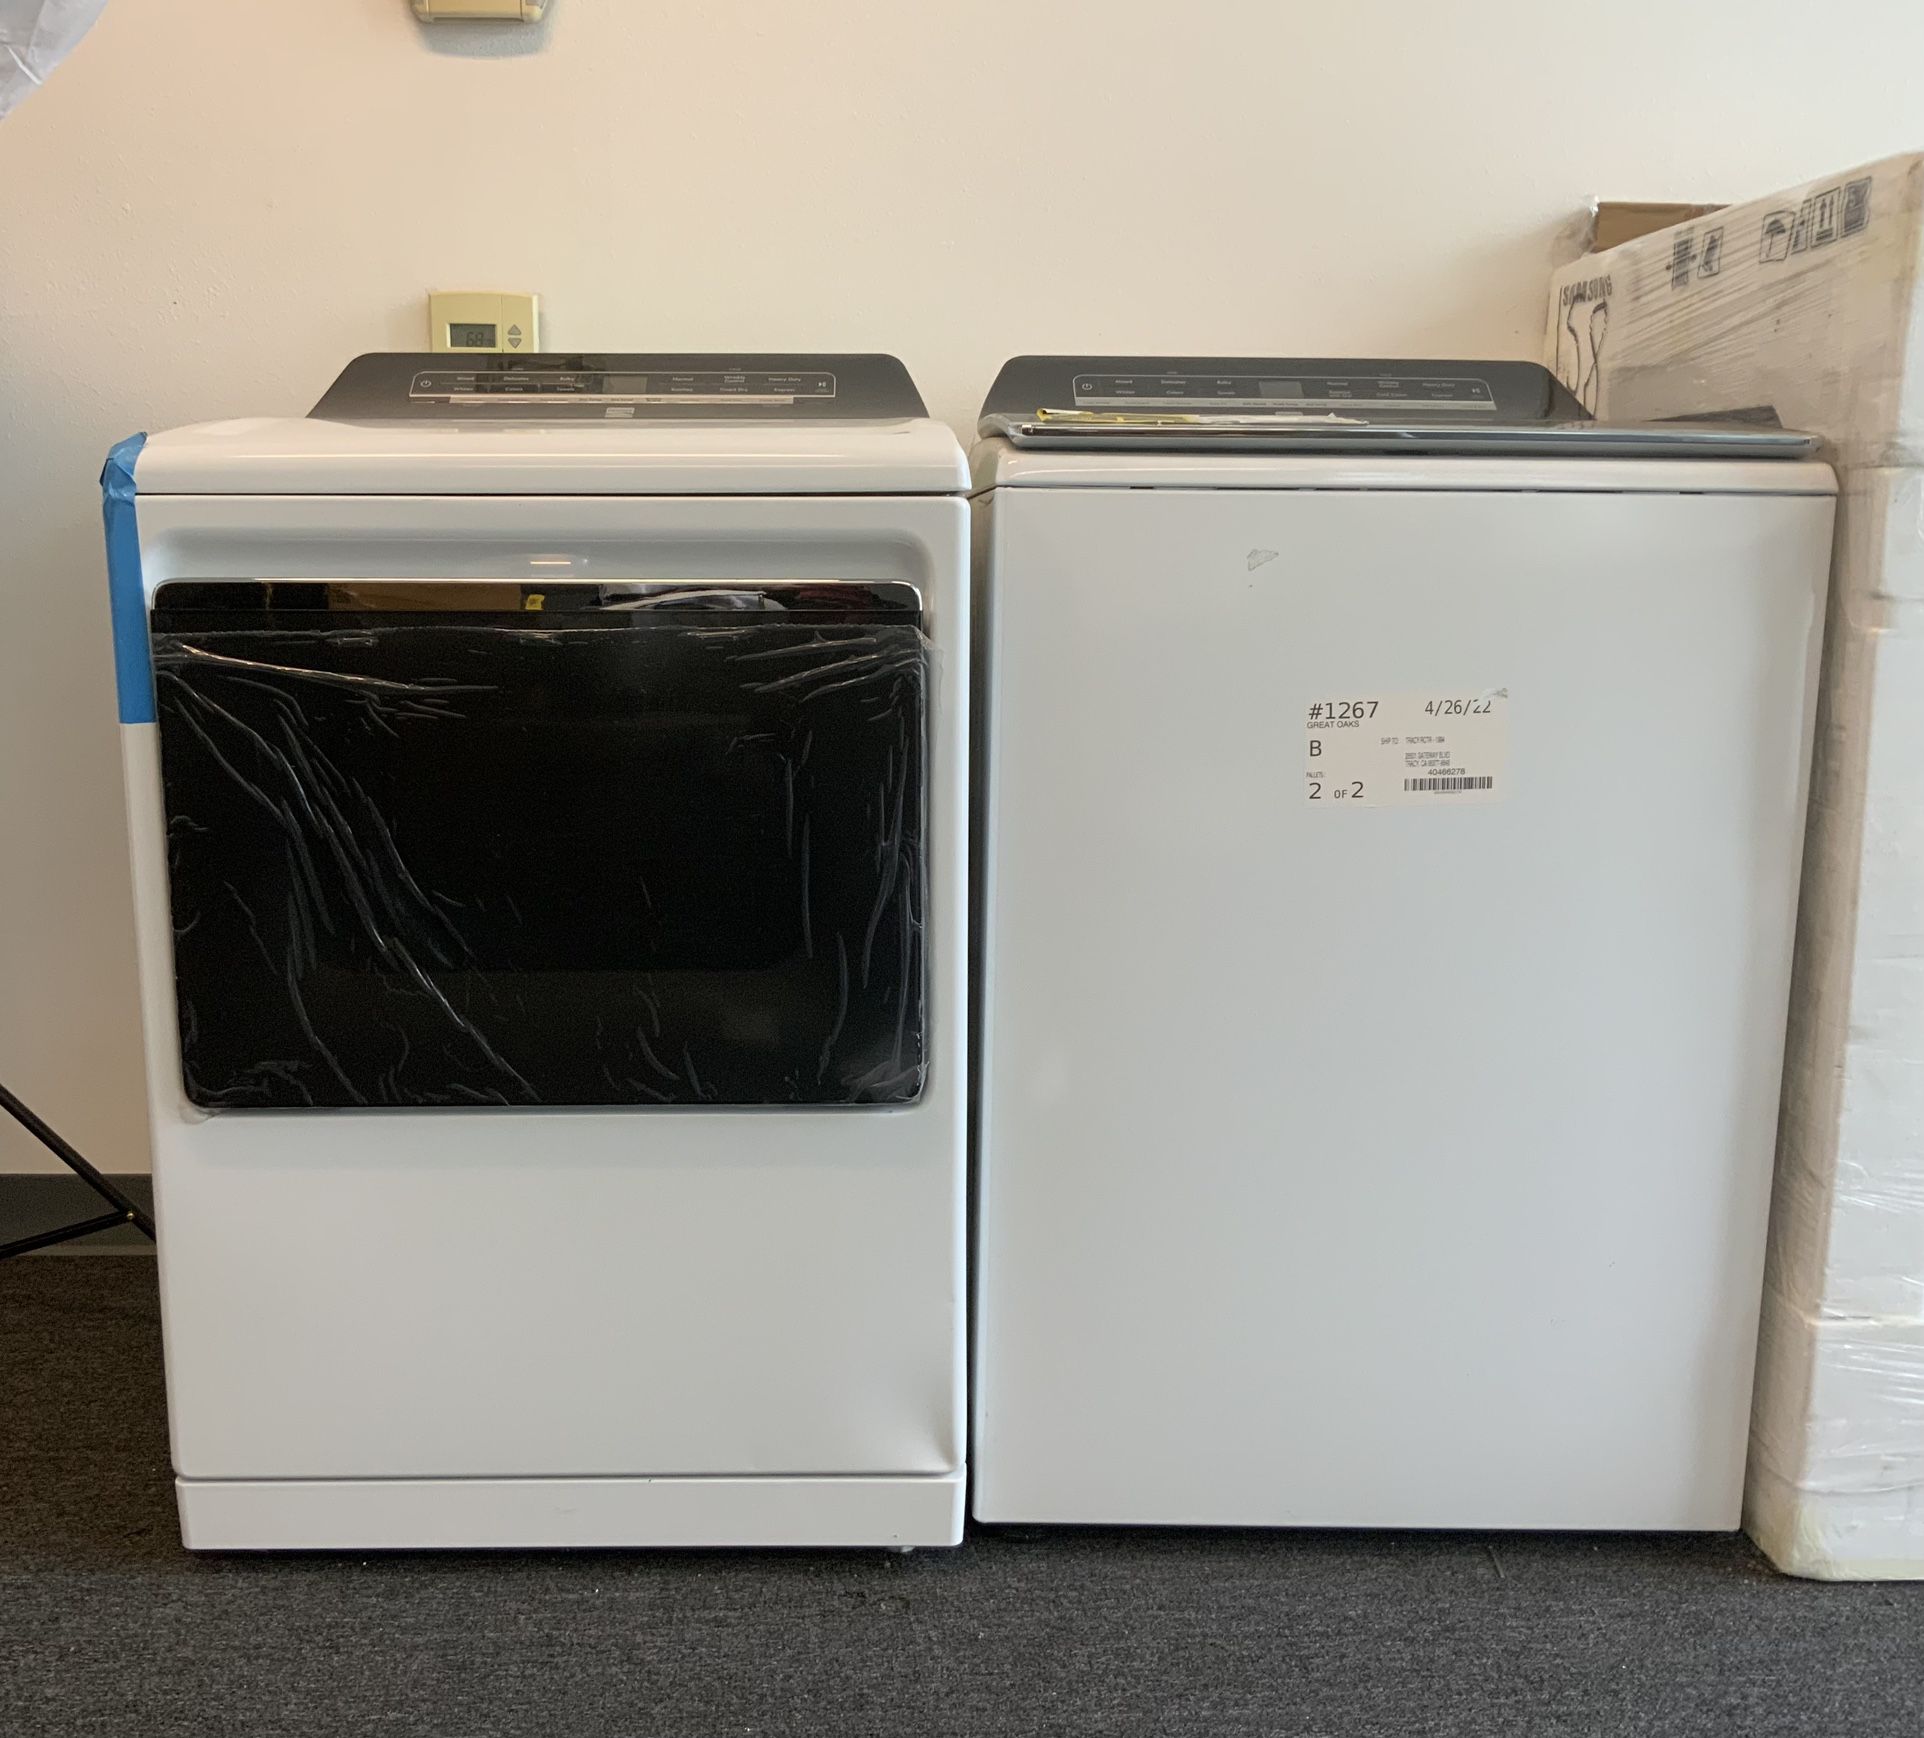 NEW Kenmore 110 Energy Star Top Load Washer 5.3Cu.Ft. & Electric Dryer 7.4 Cu.Ft. Machines -White 